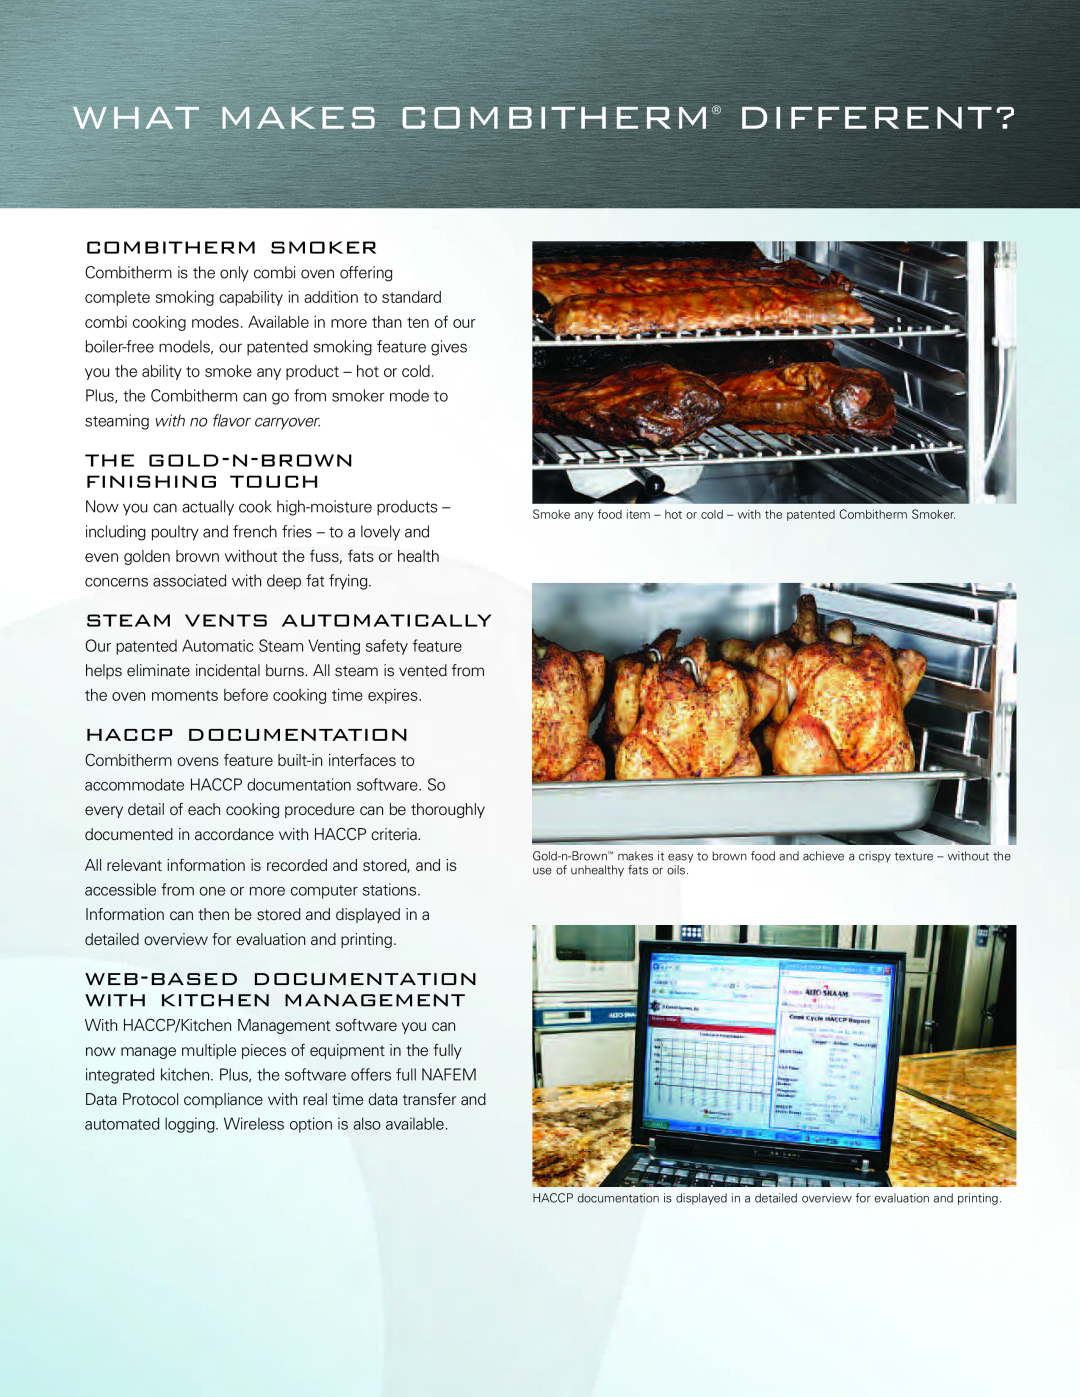 Alto-Shaam Combi Oven manual What Makes Combitherm Different?, combitherm smoker, the gold-n-brownfinishing touch 